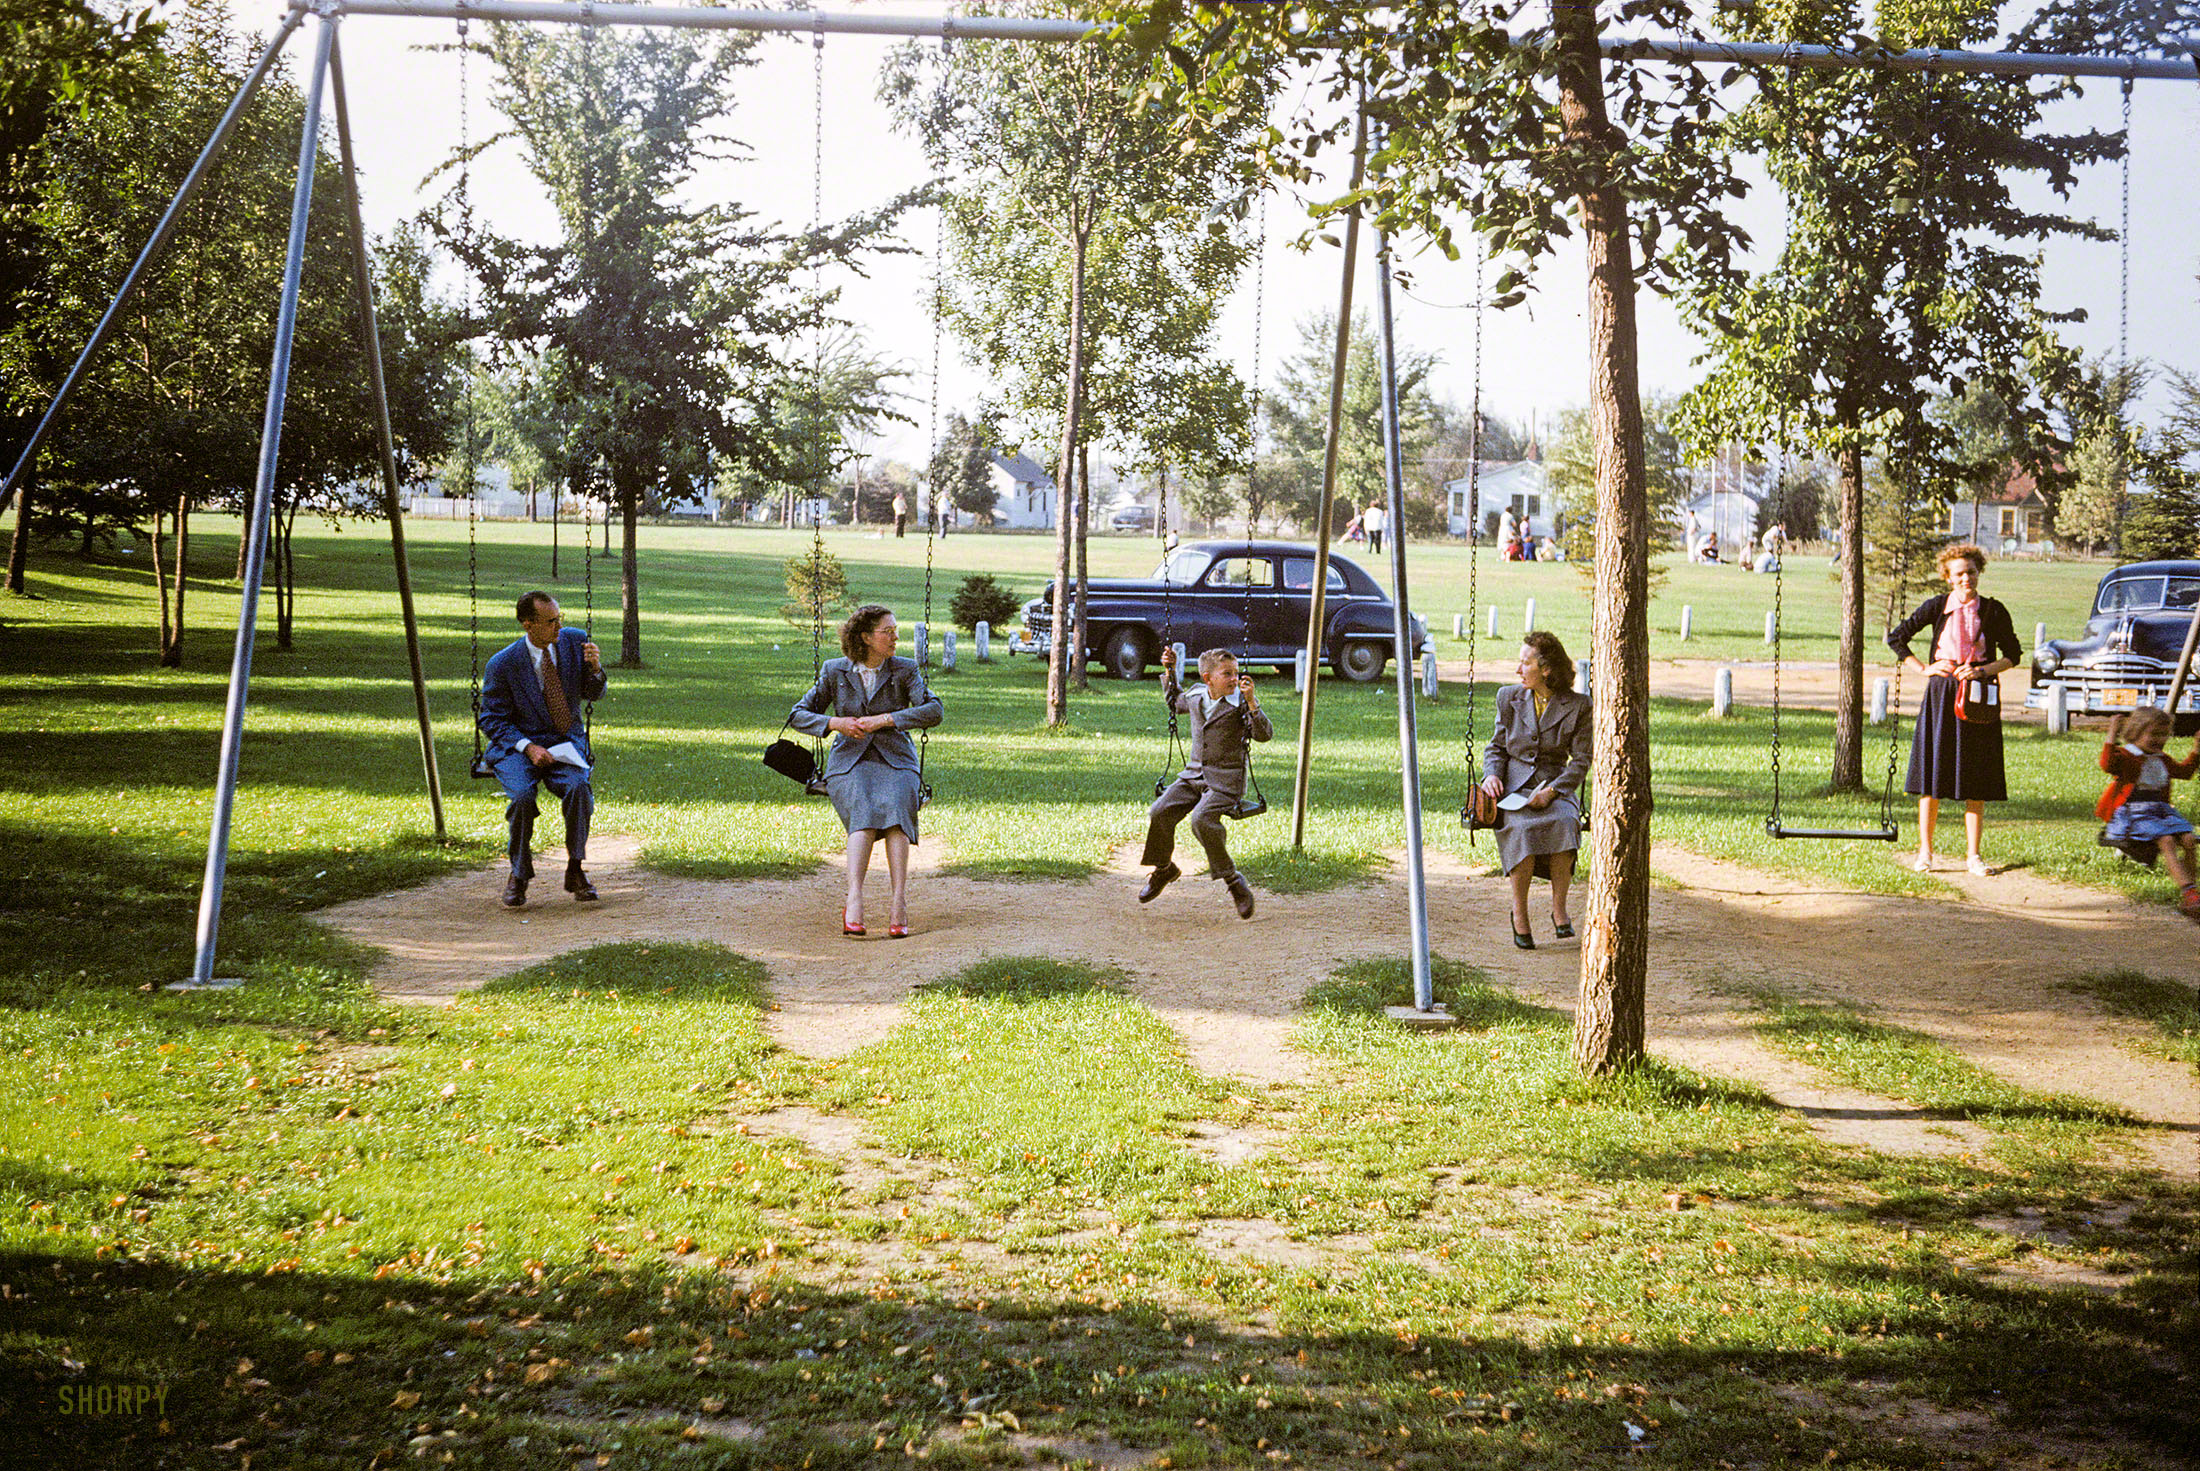 "7 Sept 1952. Picnic at Austin. Ivan, Dottie, Loren, Grace." A little cooldown after the sack race, maybe, in this latest installment of our popular new reality series Minnesota Kodachromes. 35mm color slide by Hubert Tuttle. View full size.